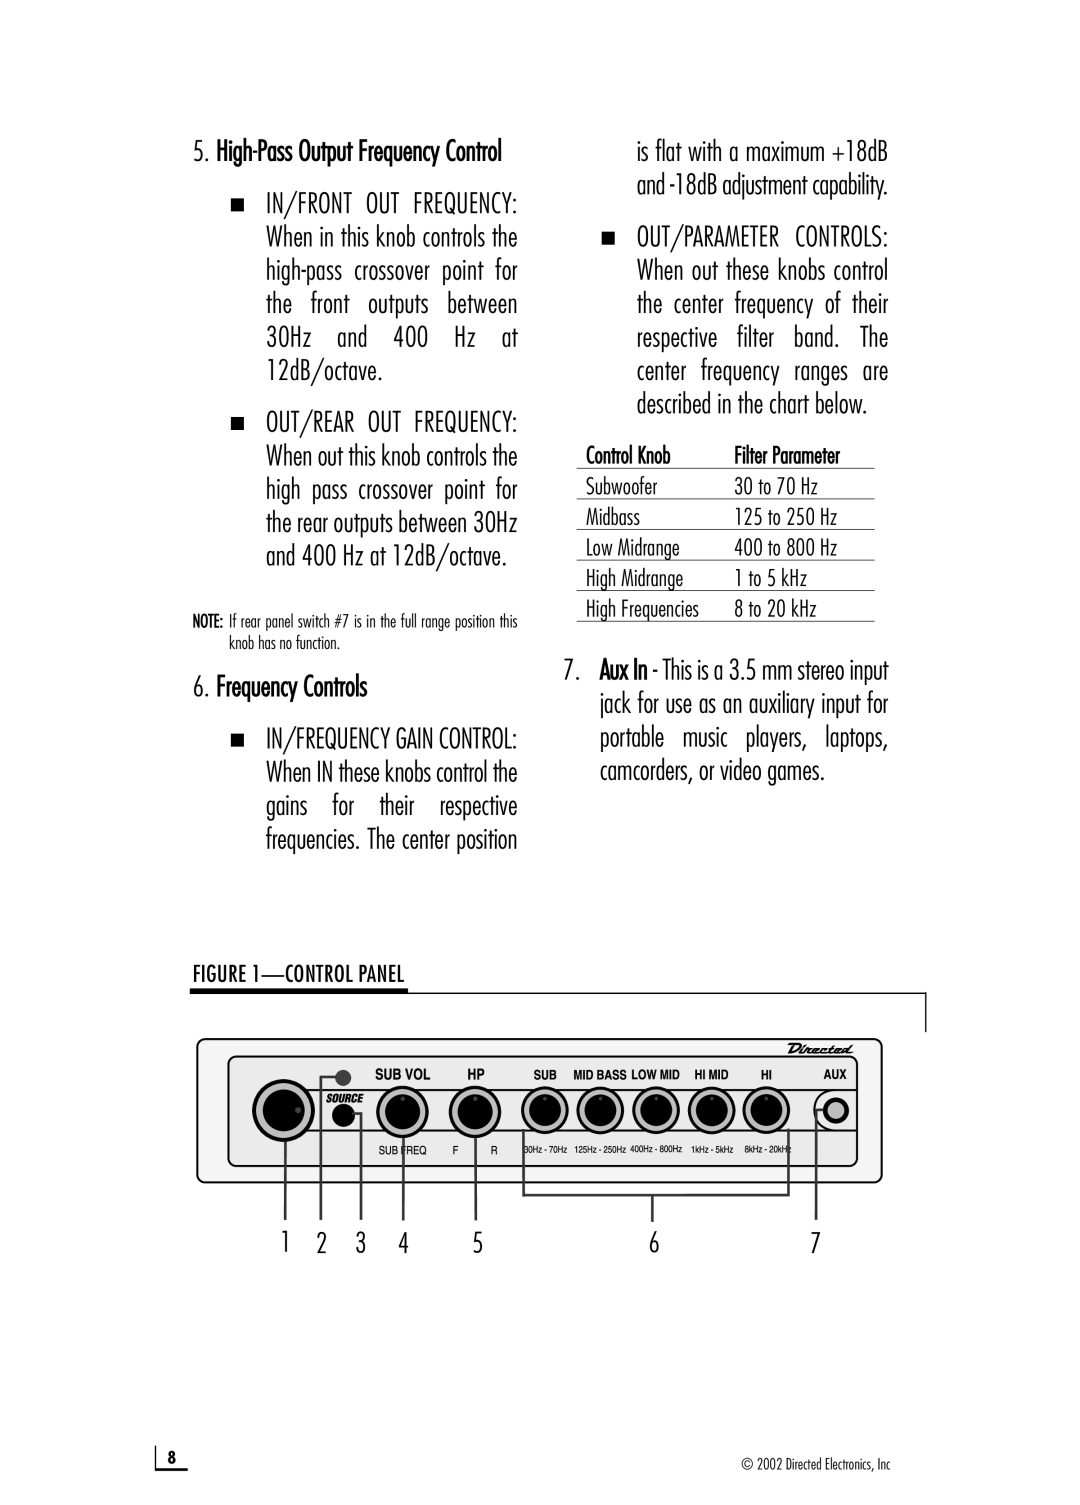 Directed Audio Model 6500 manual Frequency Controls 